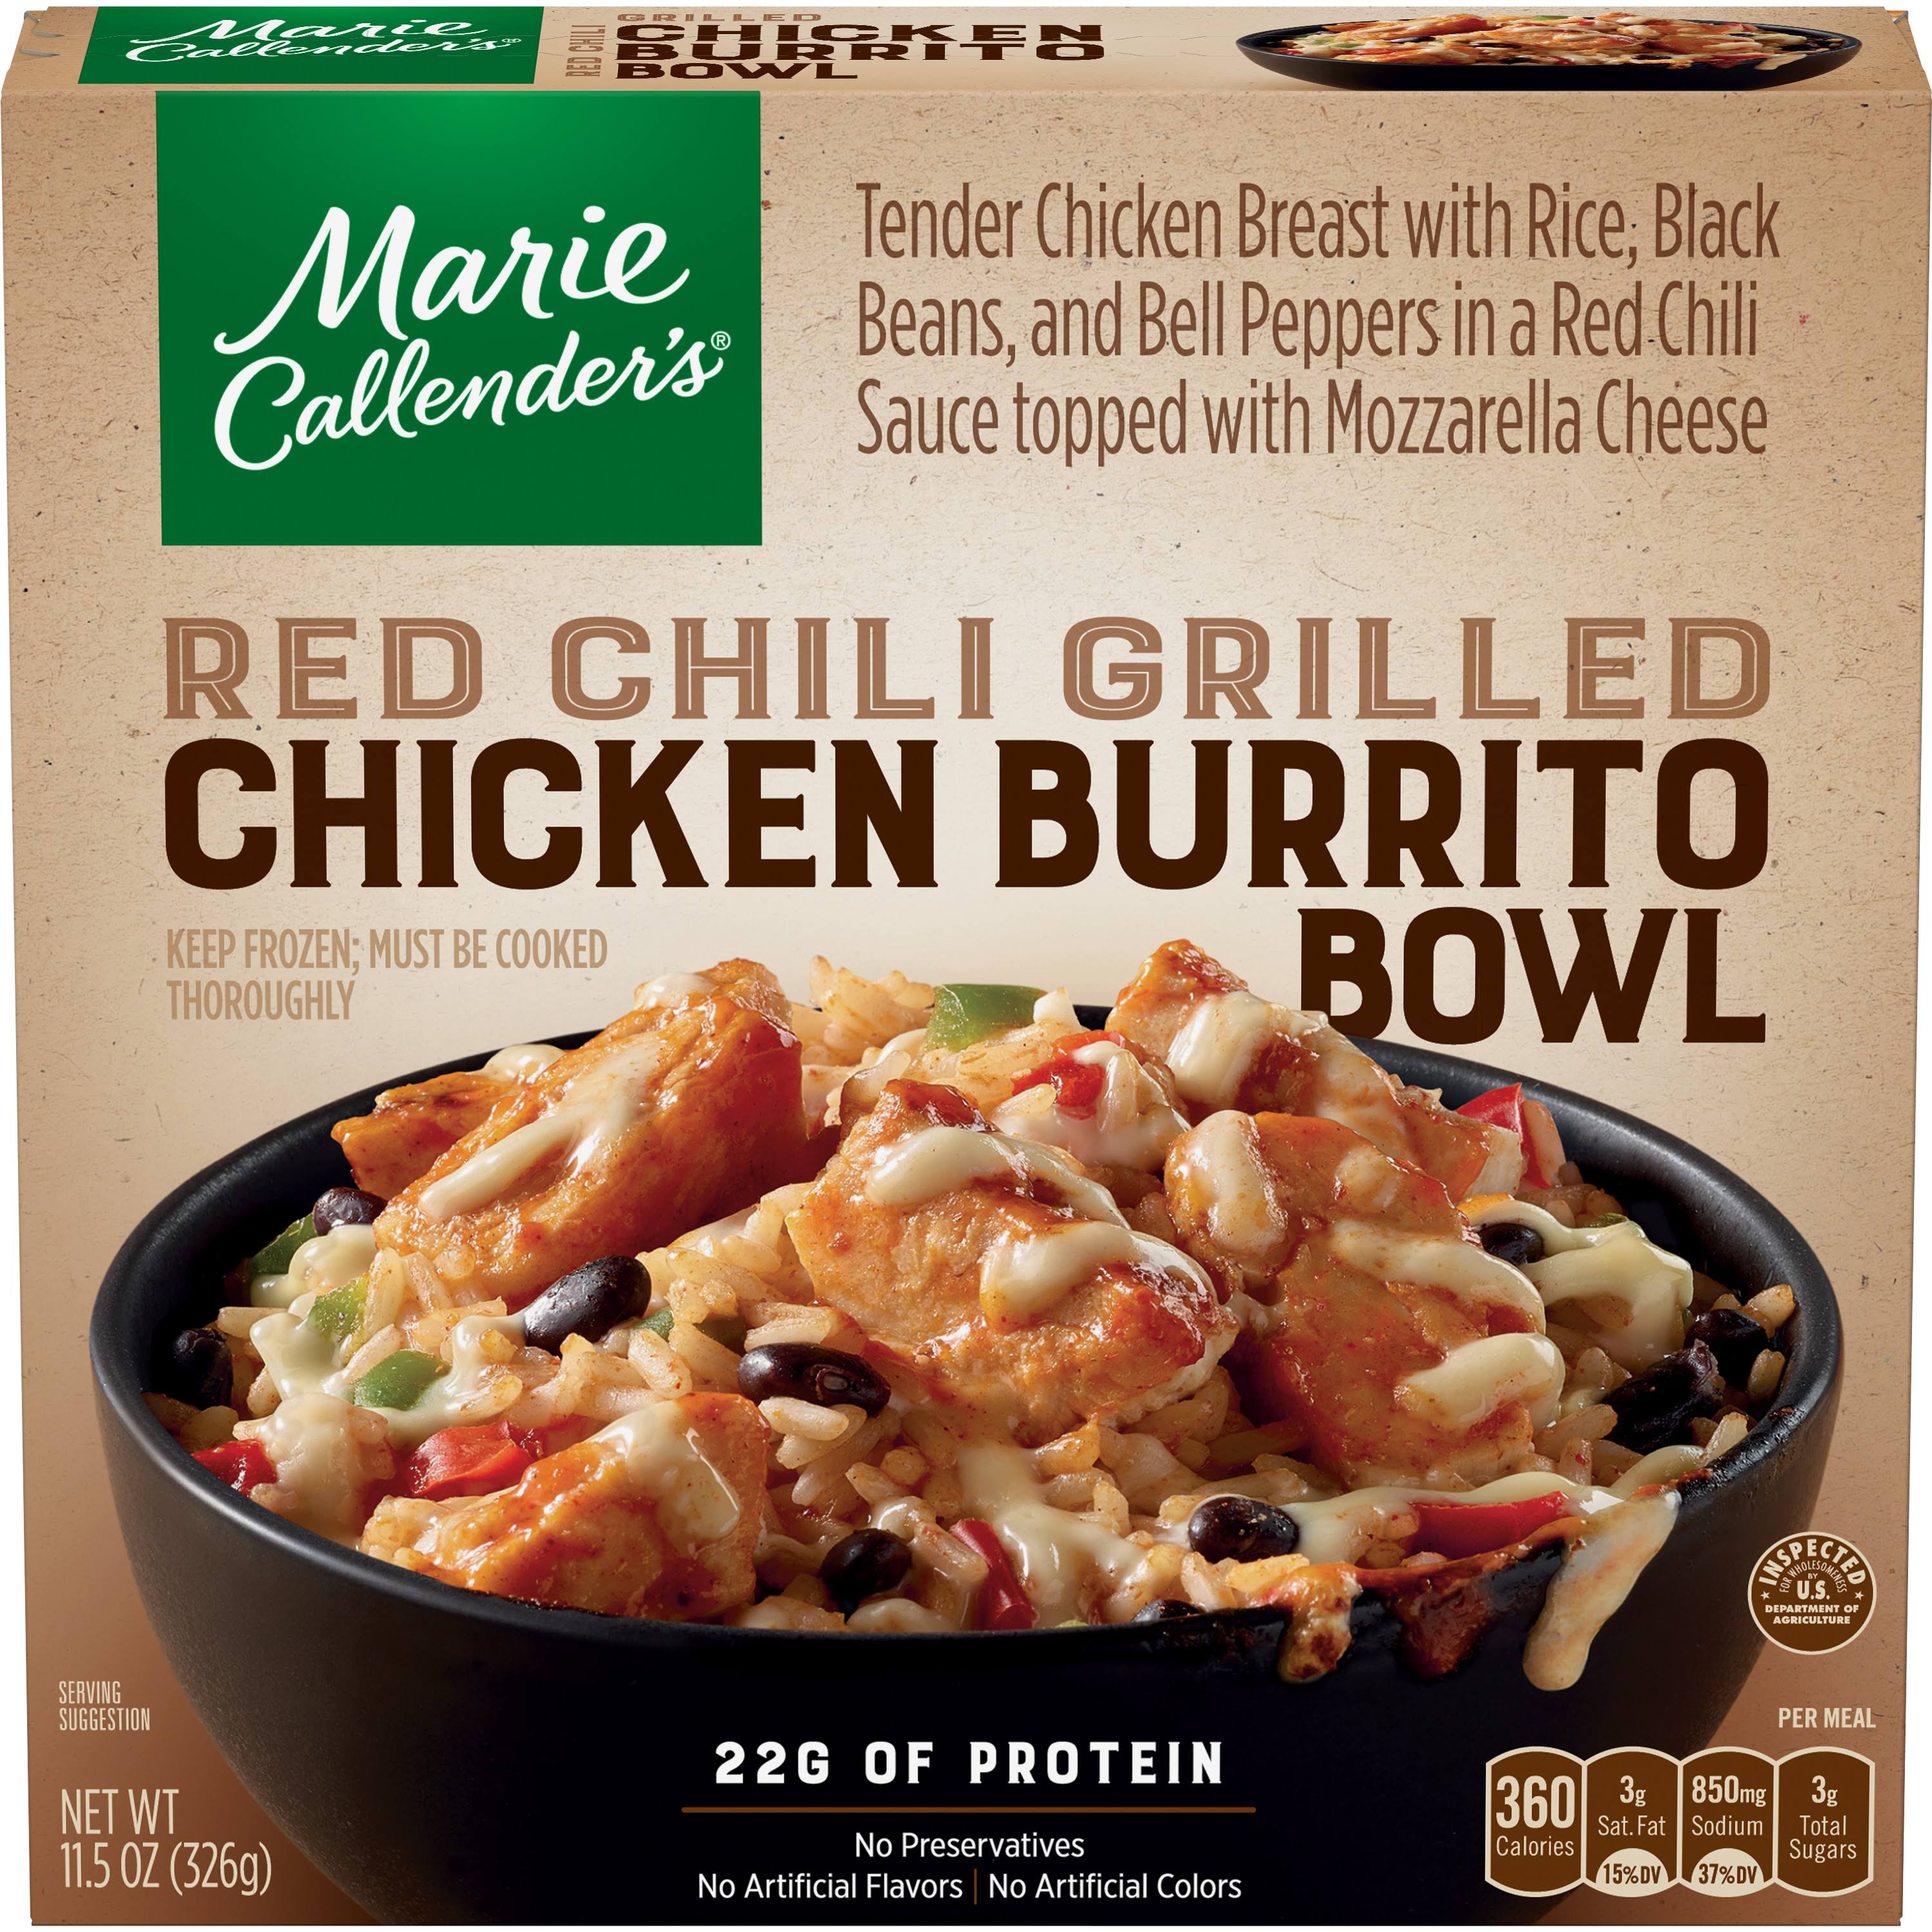 Marie Callender's Chicken Burrito Bowl, Red Chili Grilled - 11.5 oz